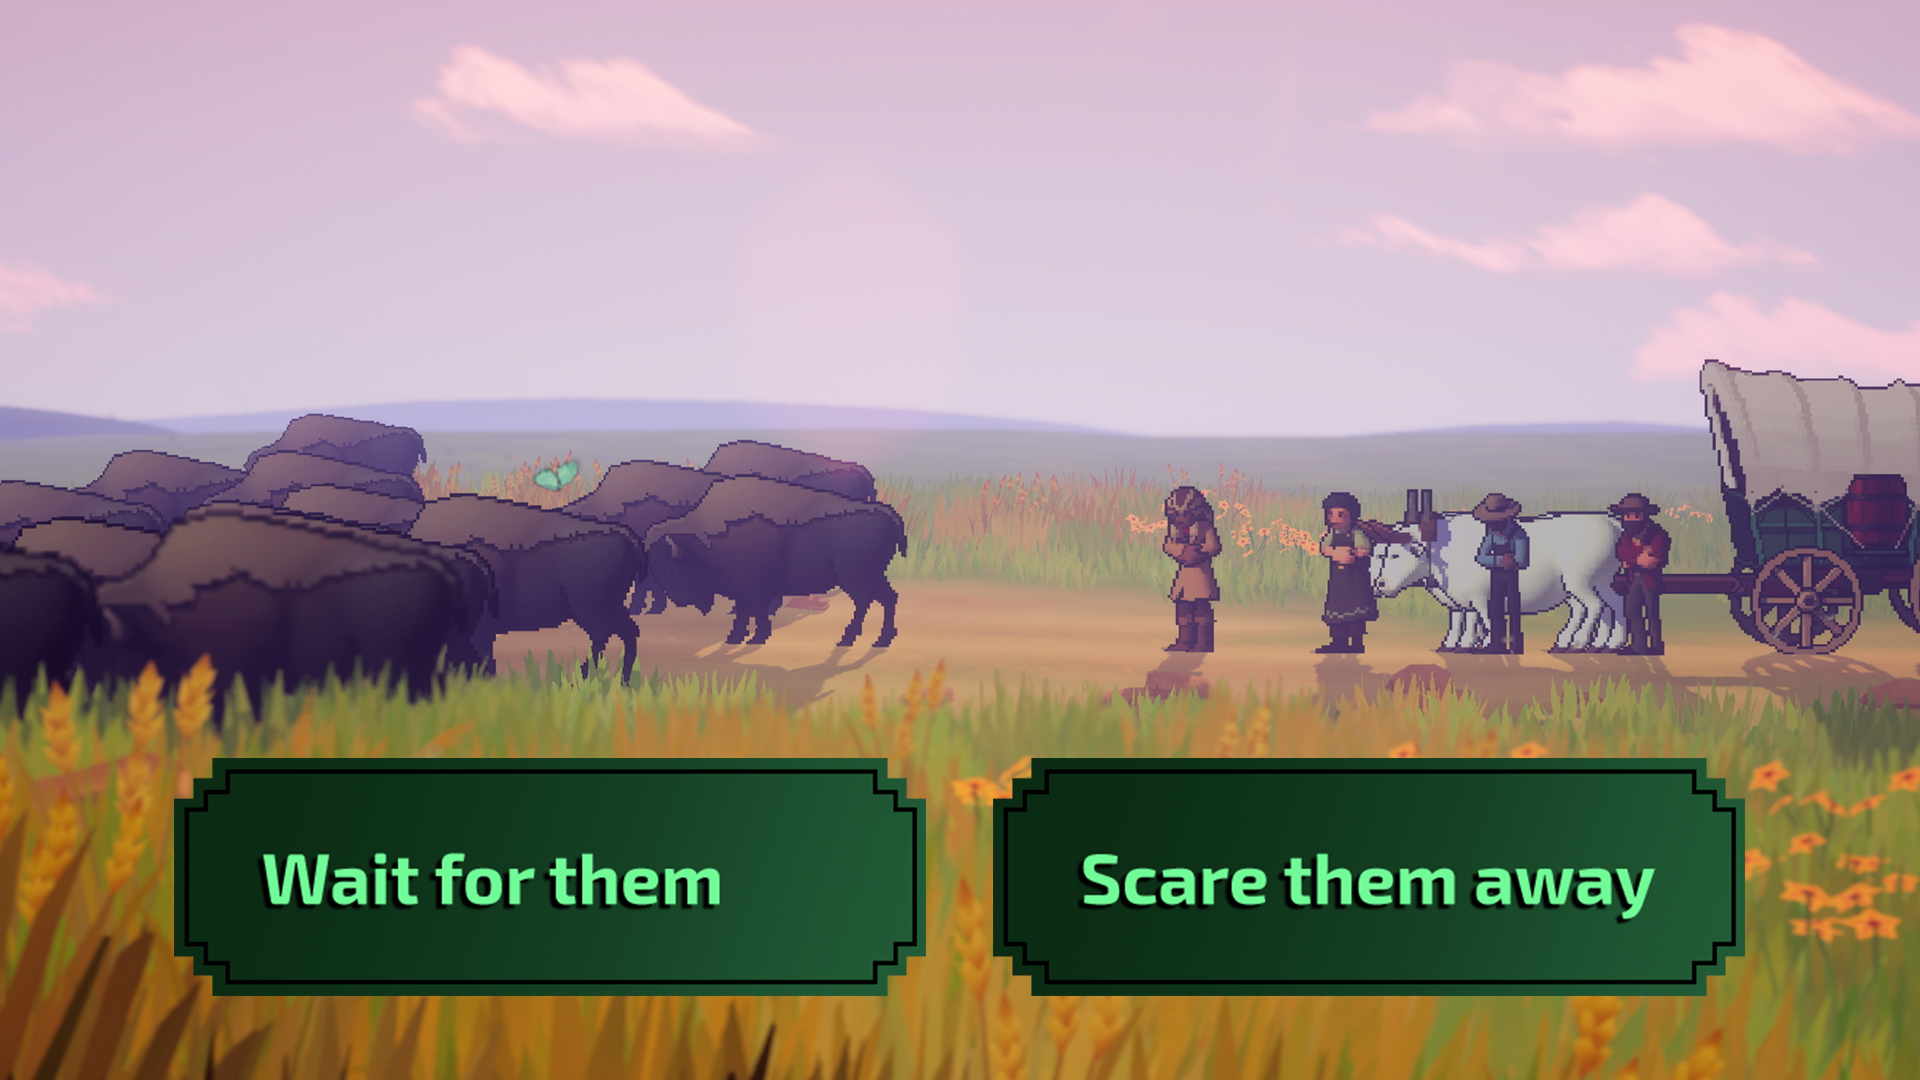 A wagon party in front of a herd of bison is faced with two choices: Wait for them or Scare them away